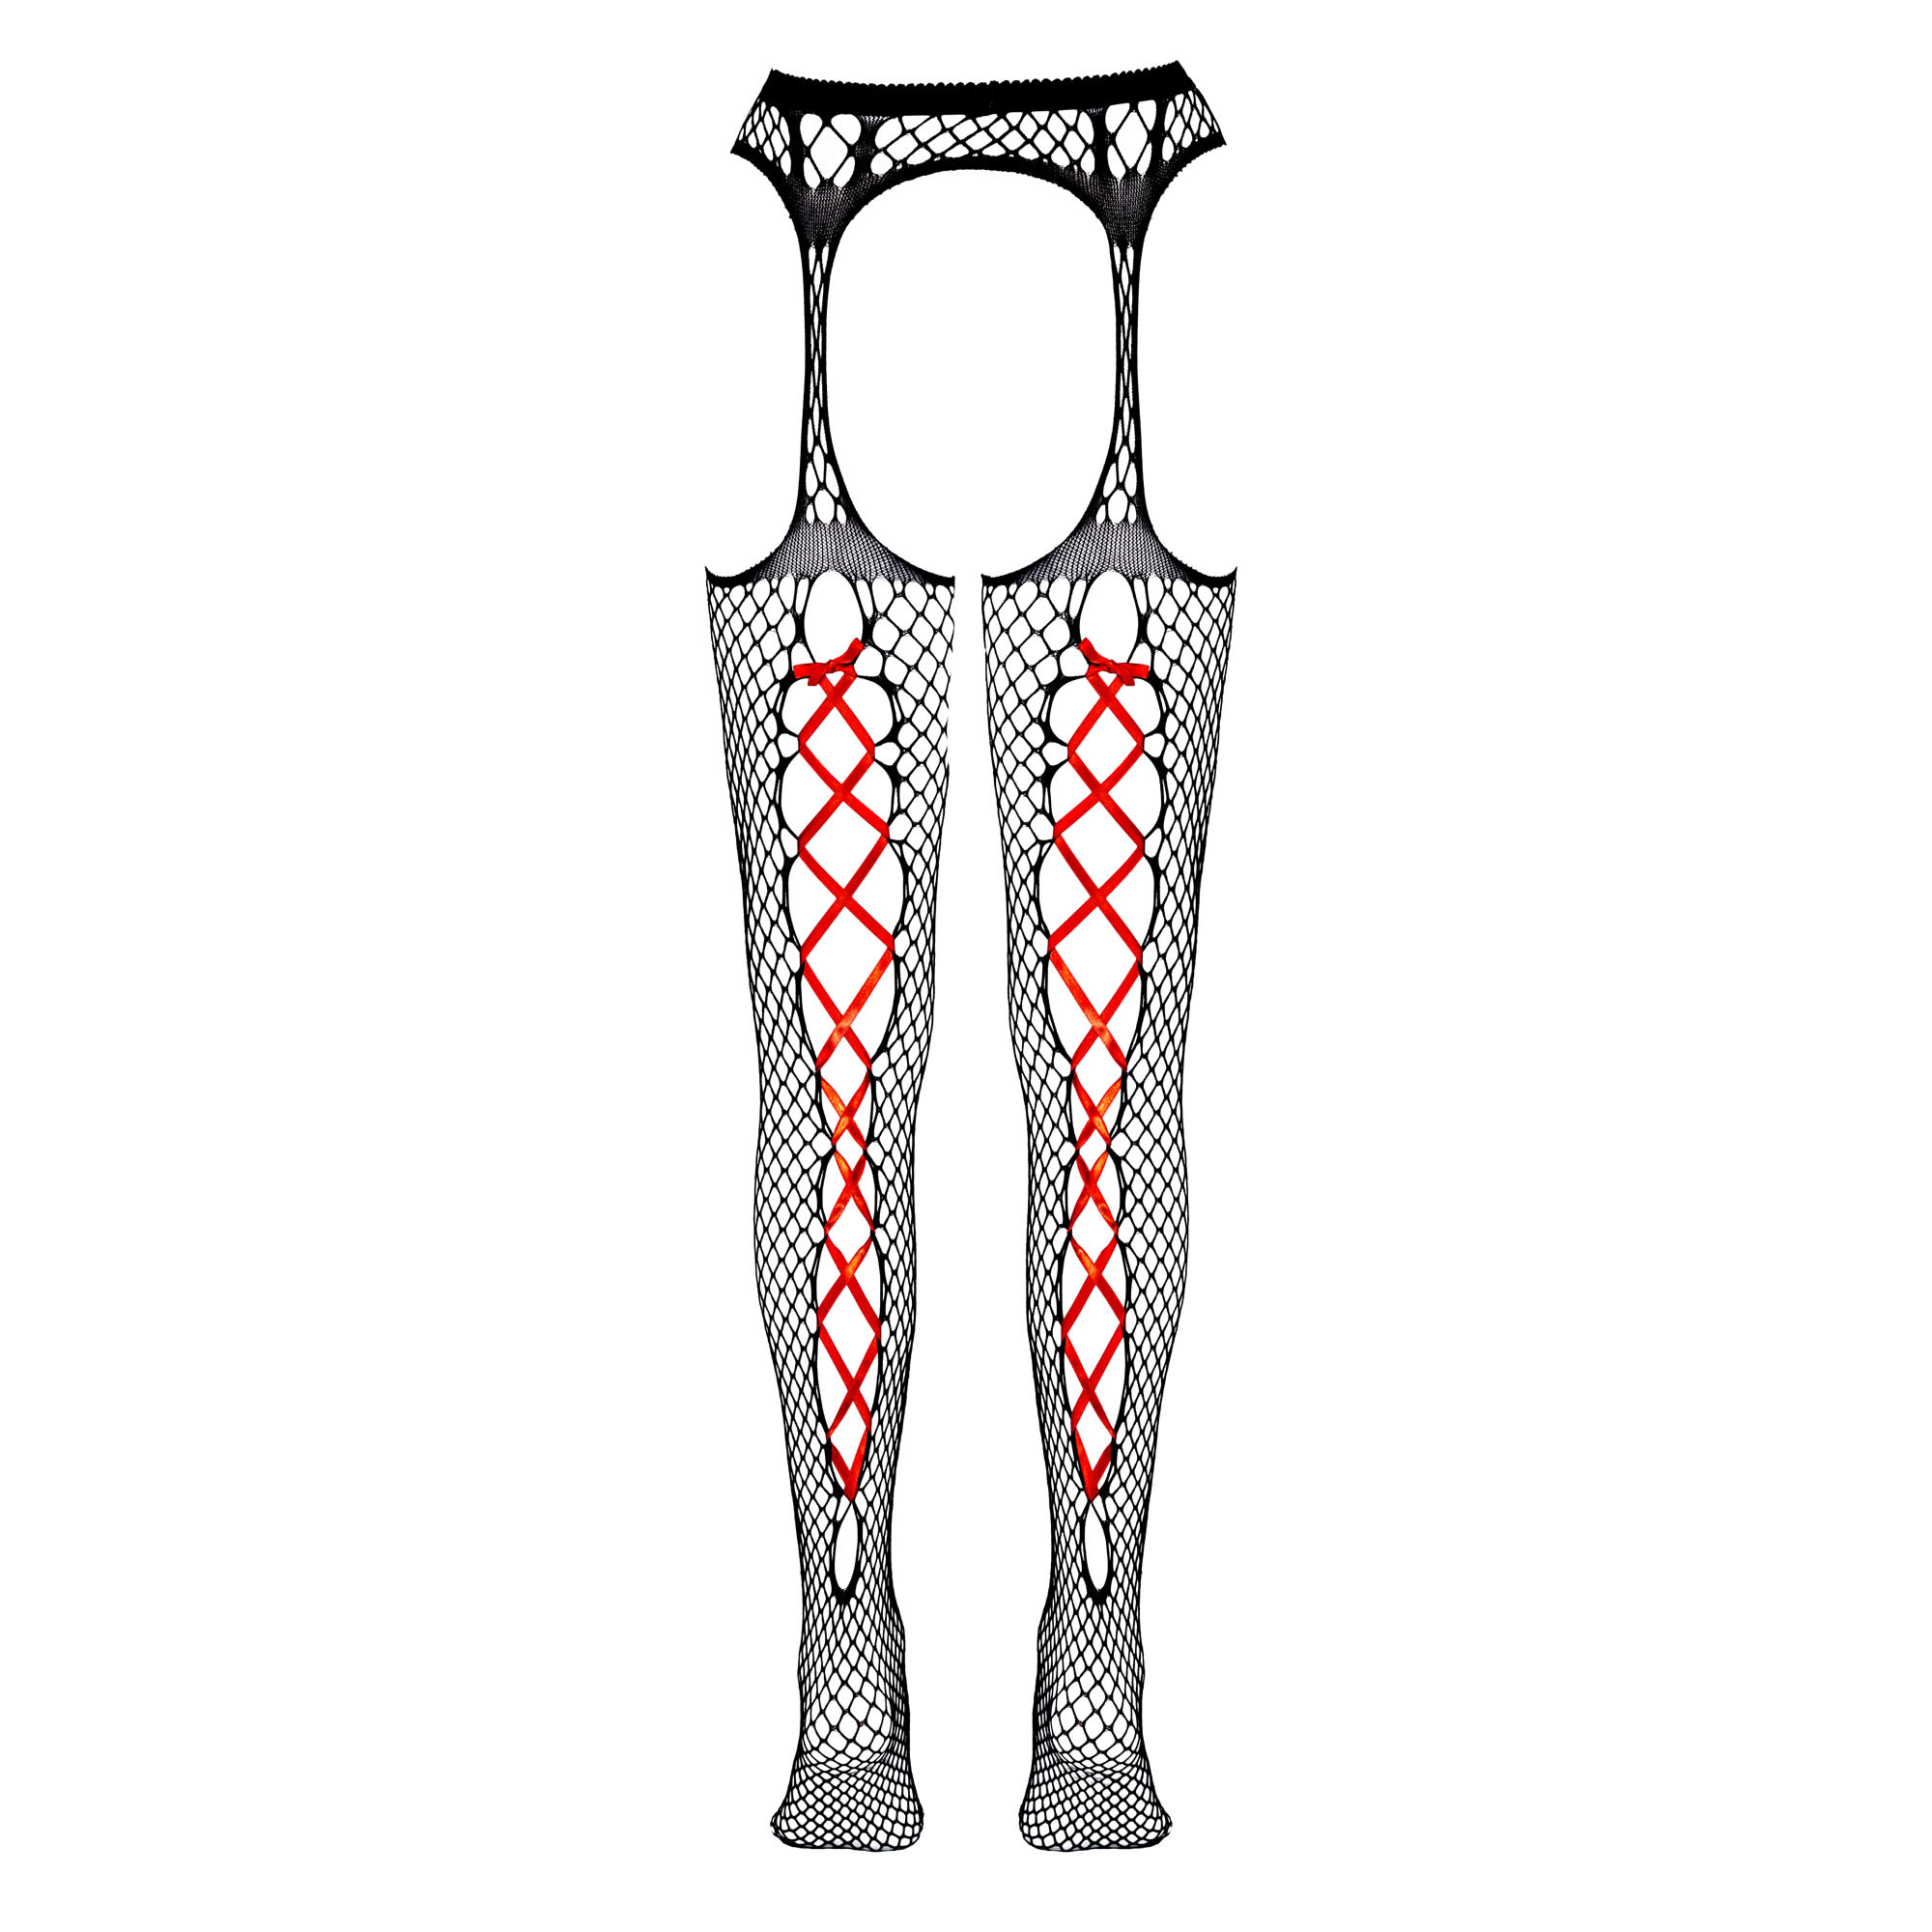 Suspender Net Tights with Red Ribbon